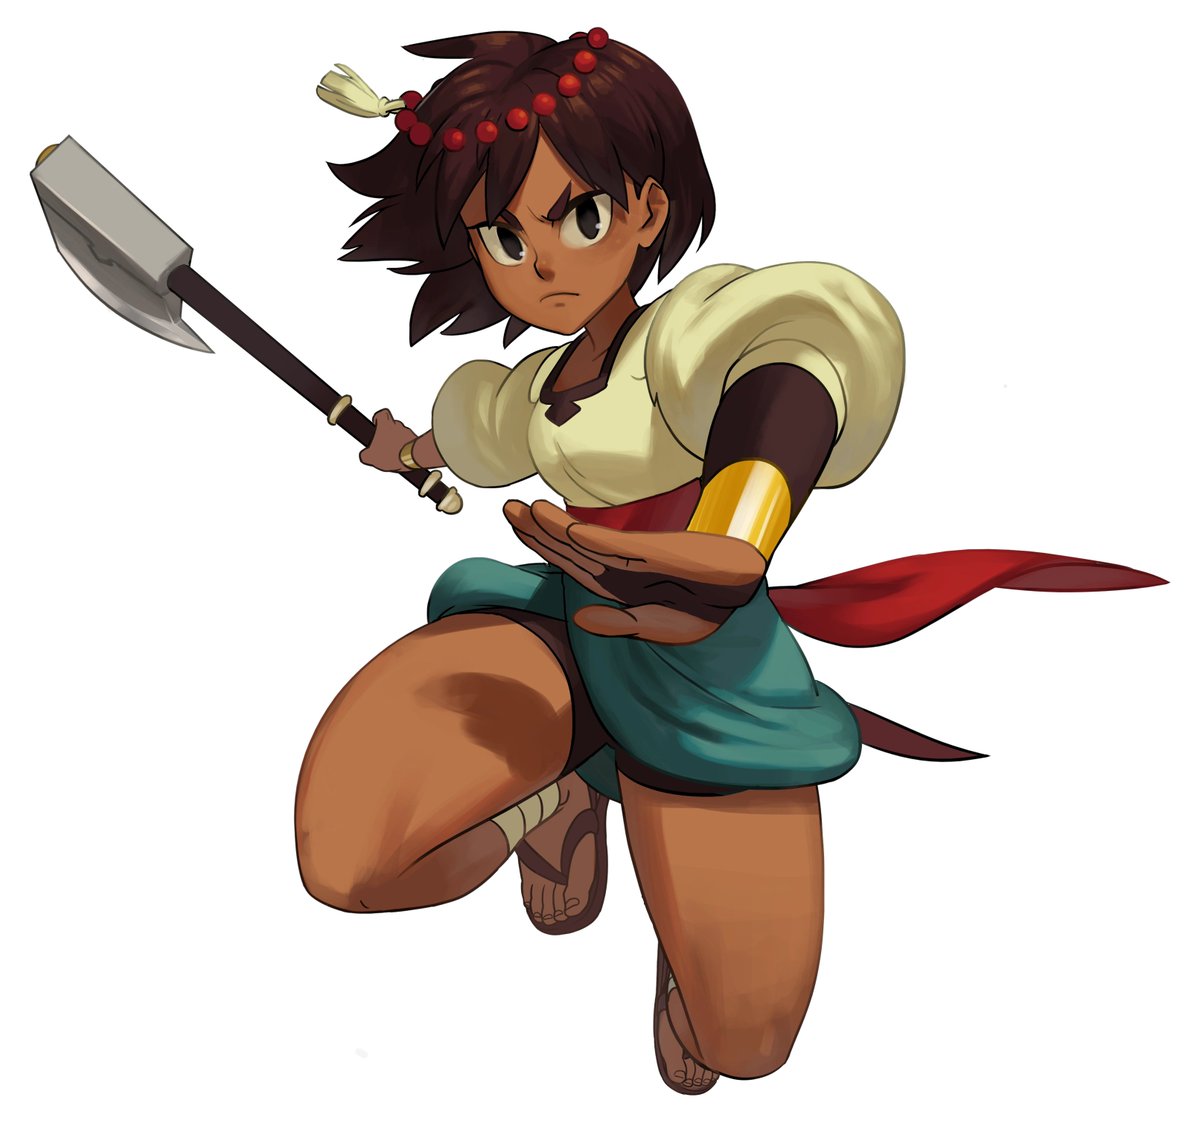 65. Ajna from Indivisible